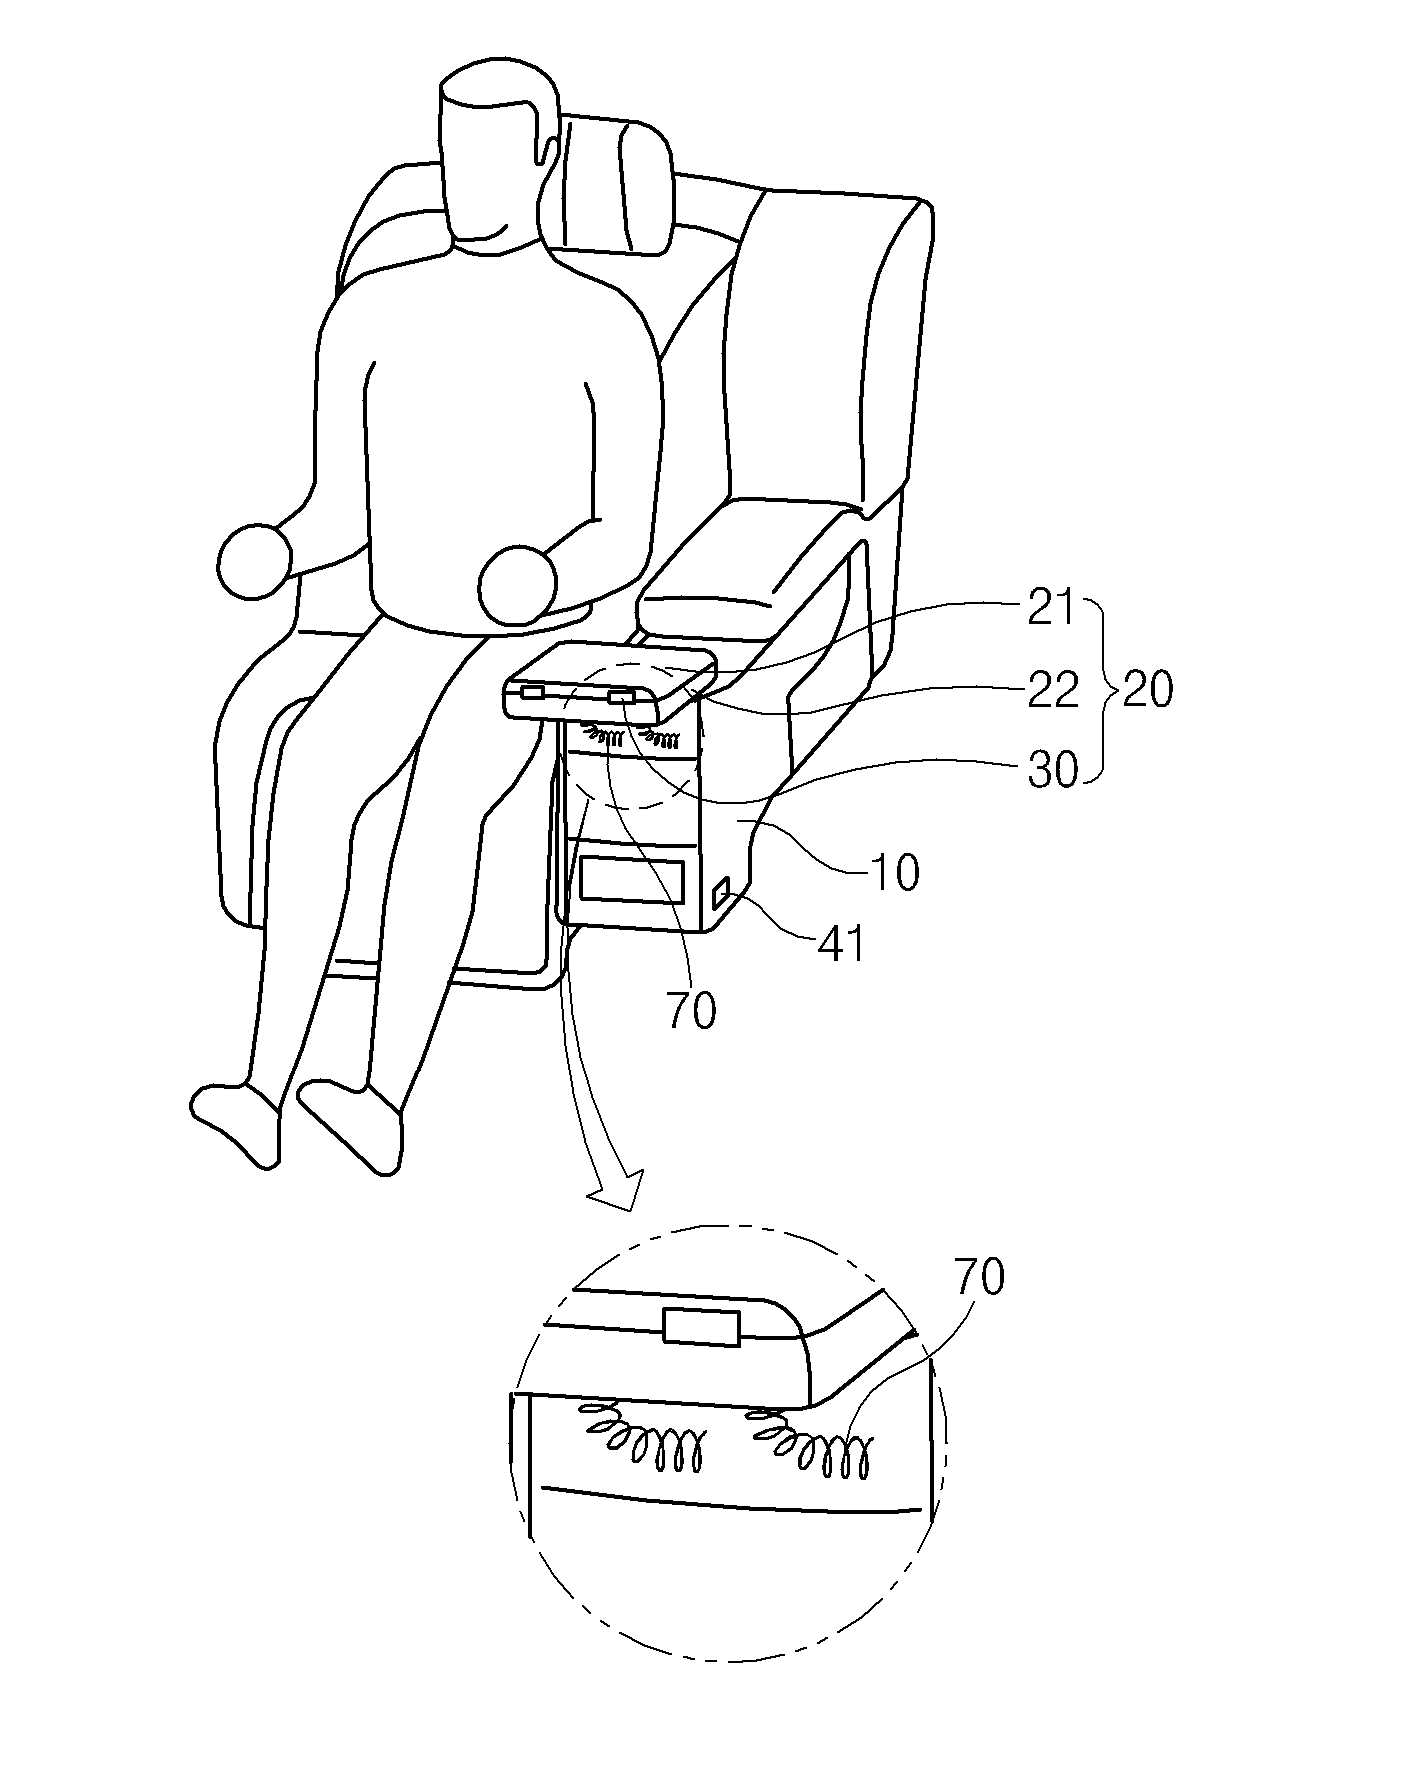 Rear seat table assembly for vehicle